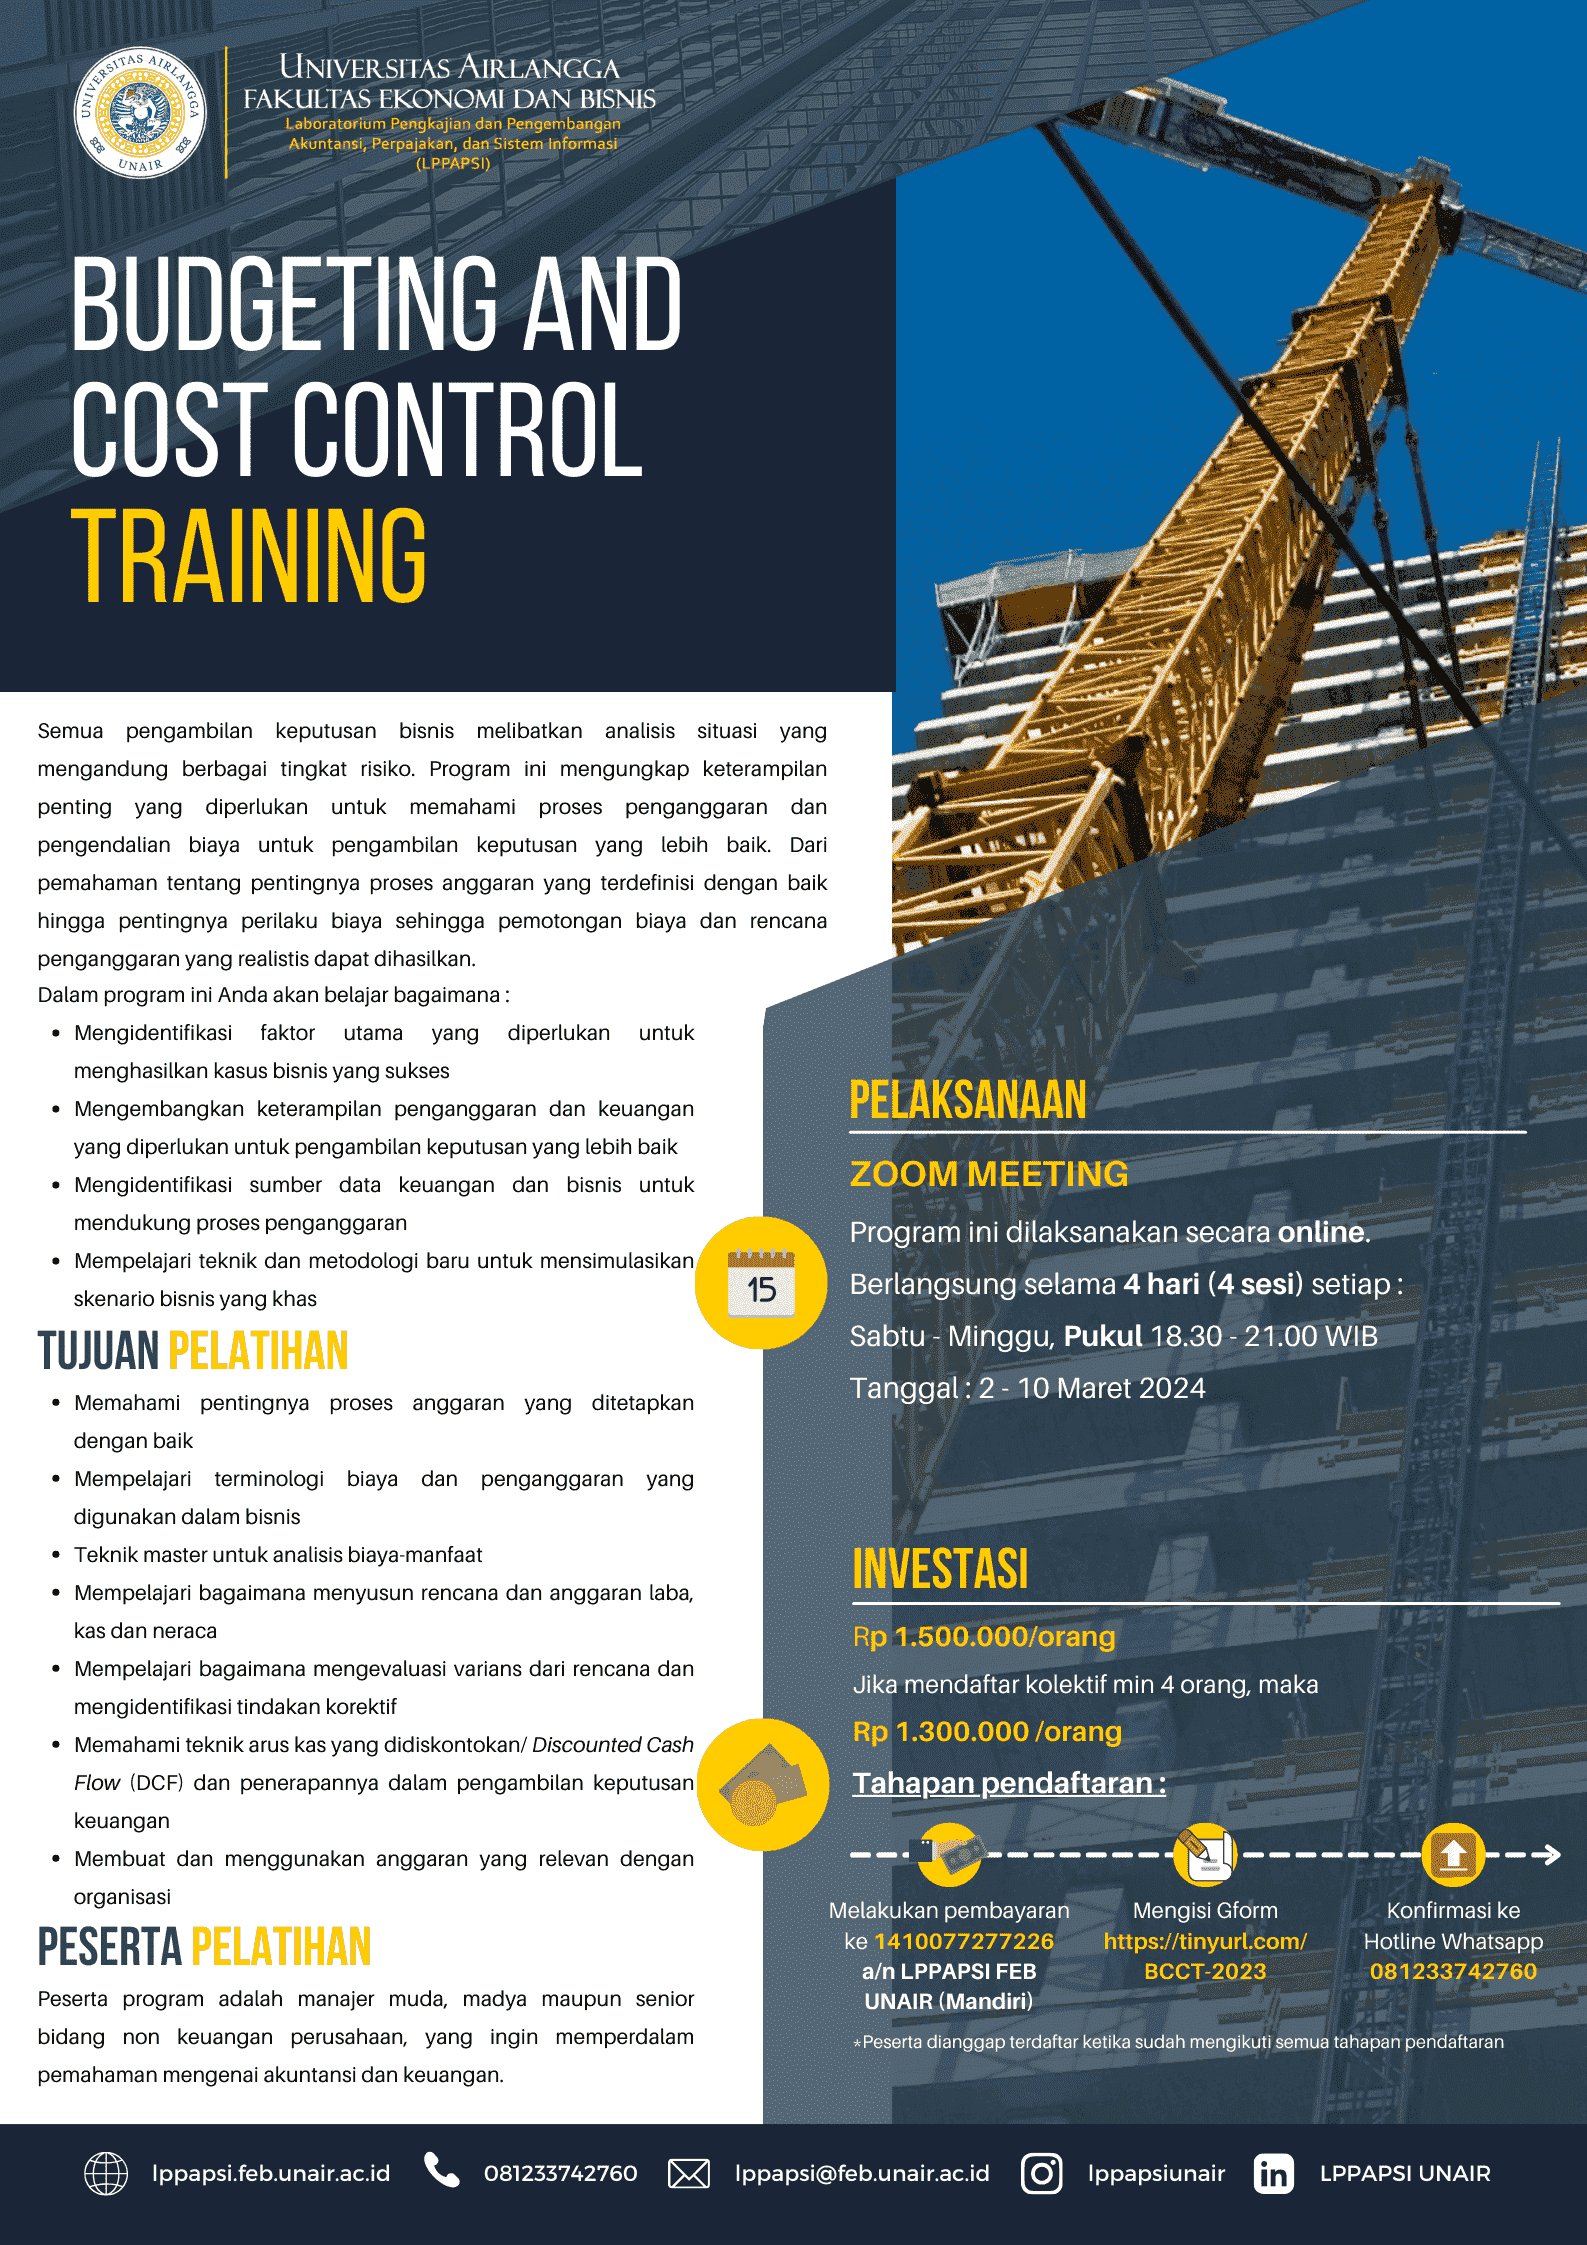 Budgeting and Cost Control Training